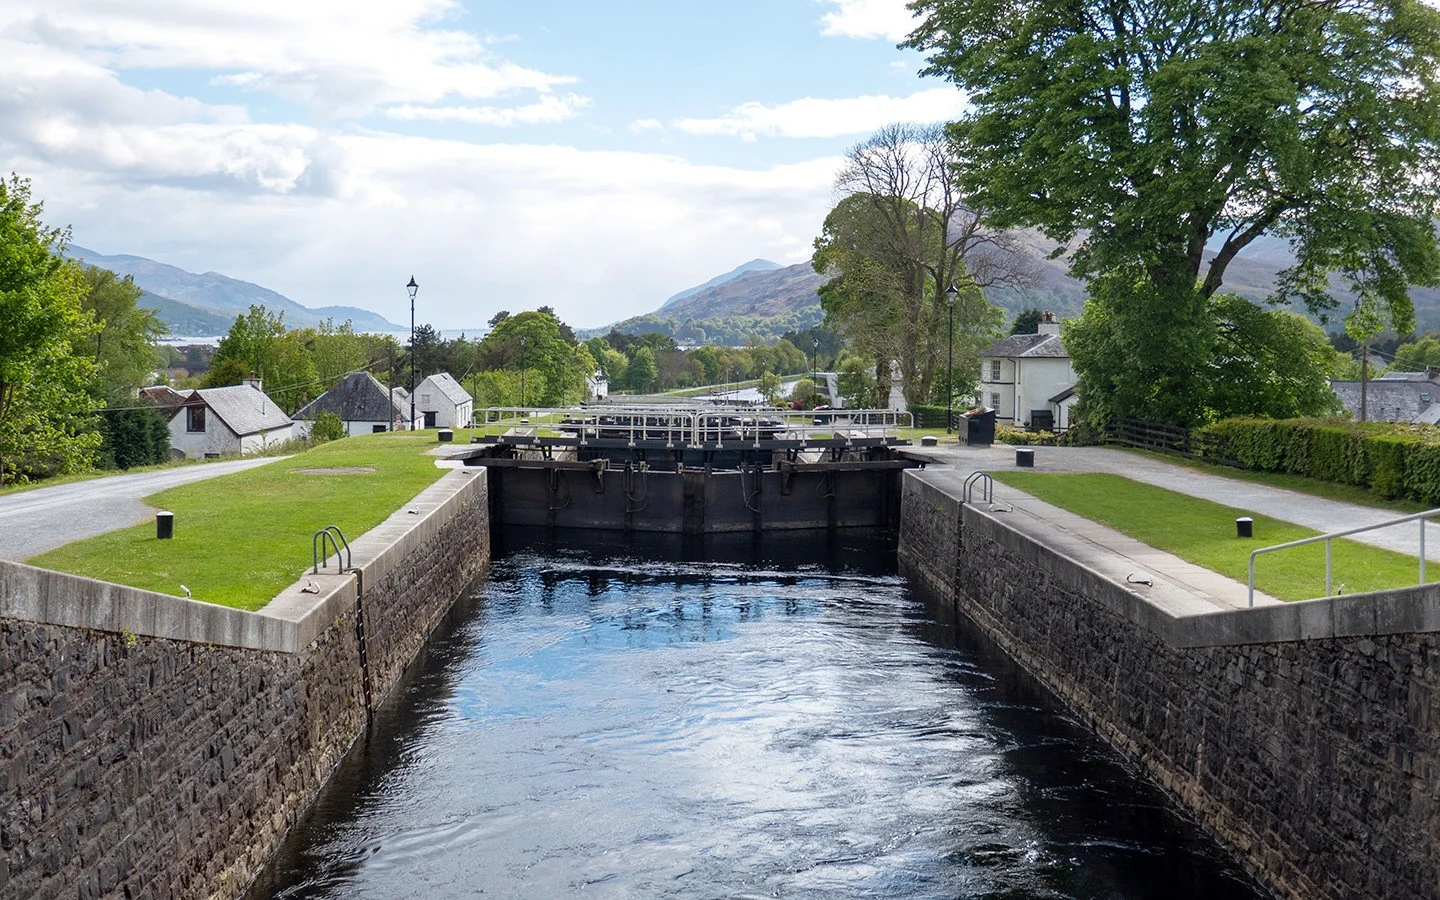 Neptune's Staircase canal locks on a day trip from Fort William in Scotland